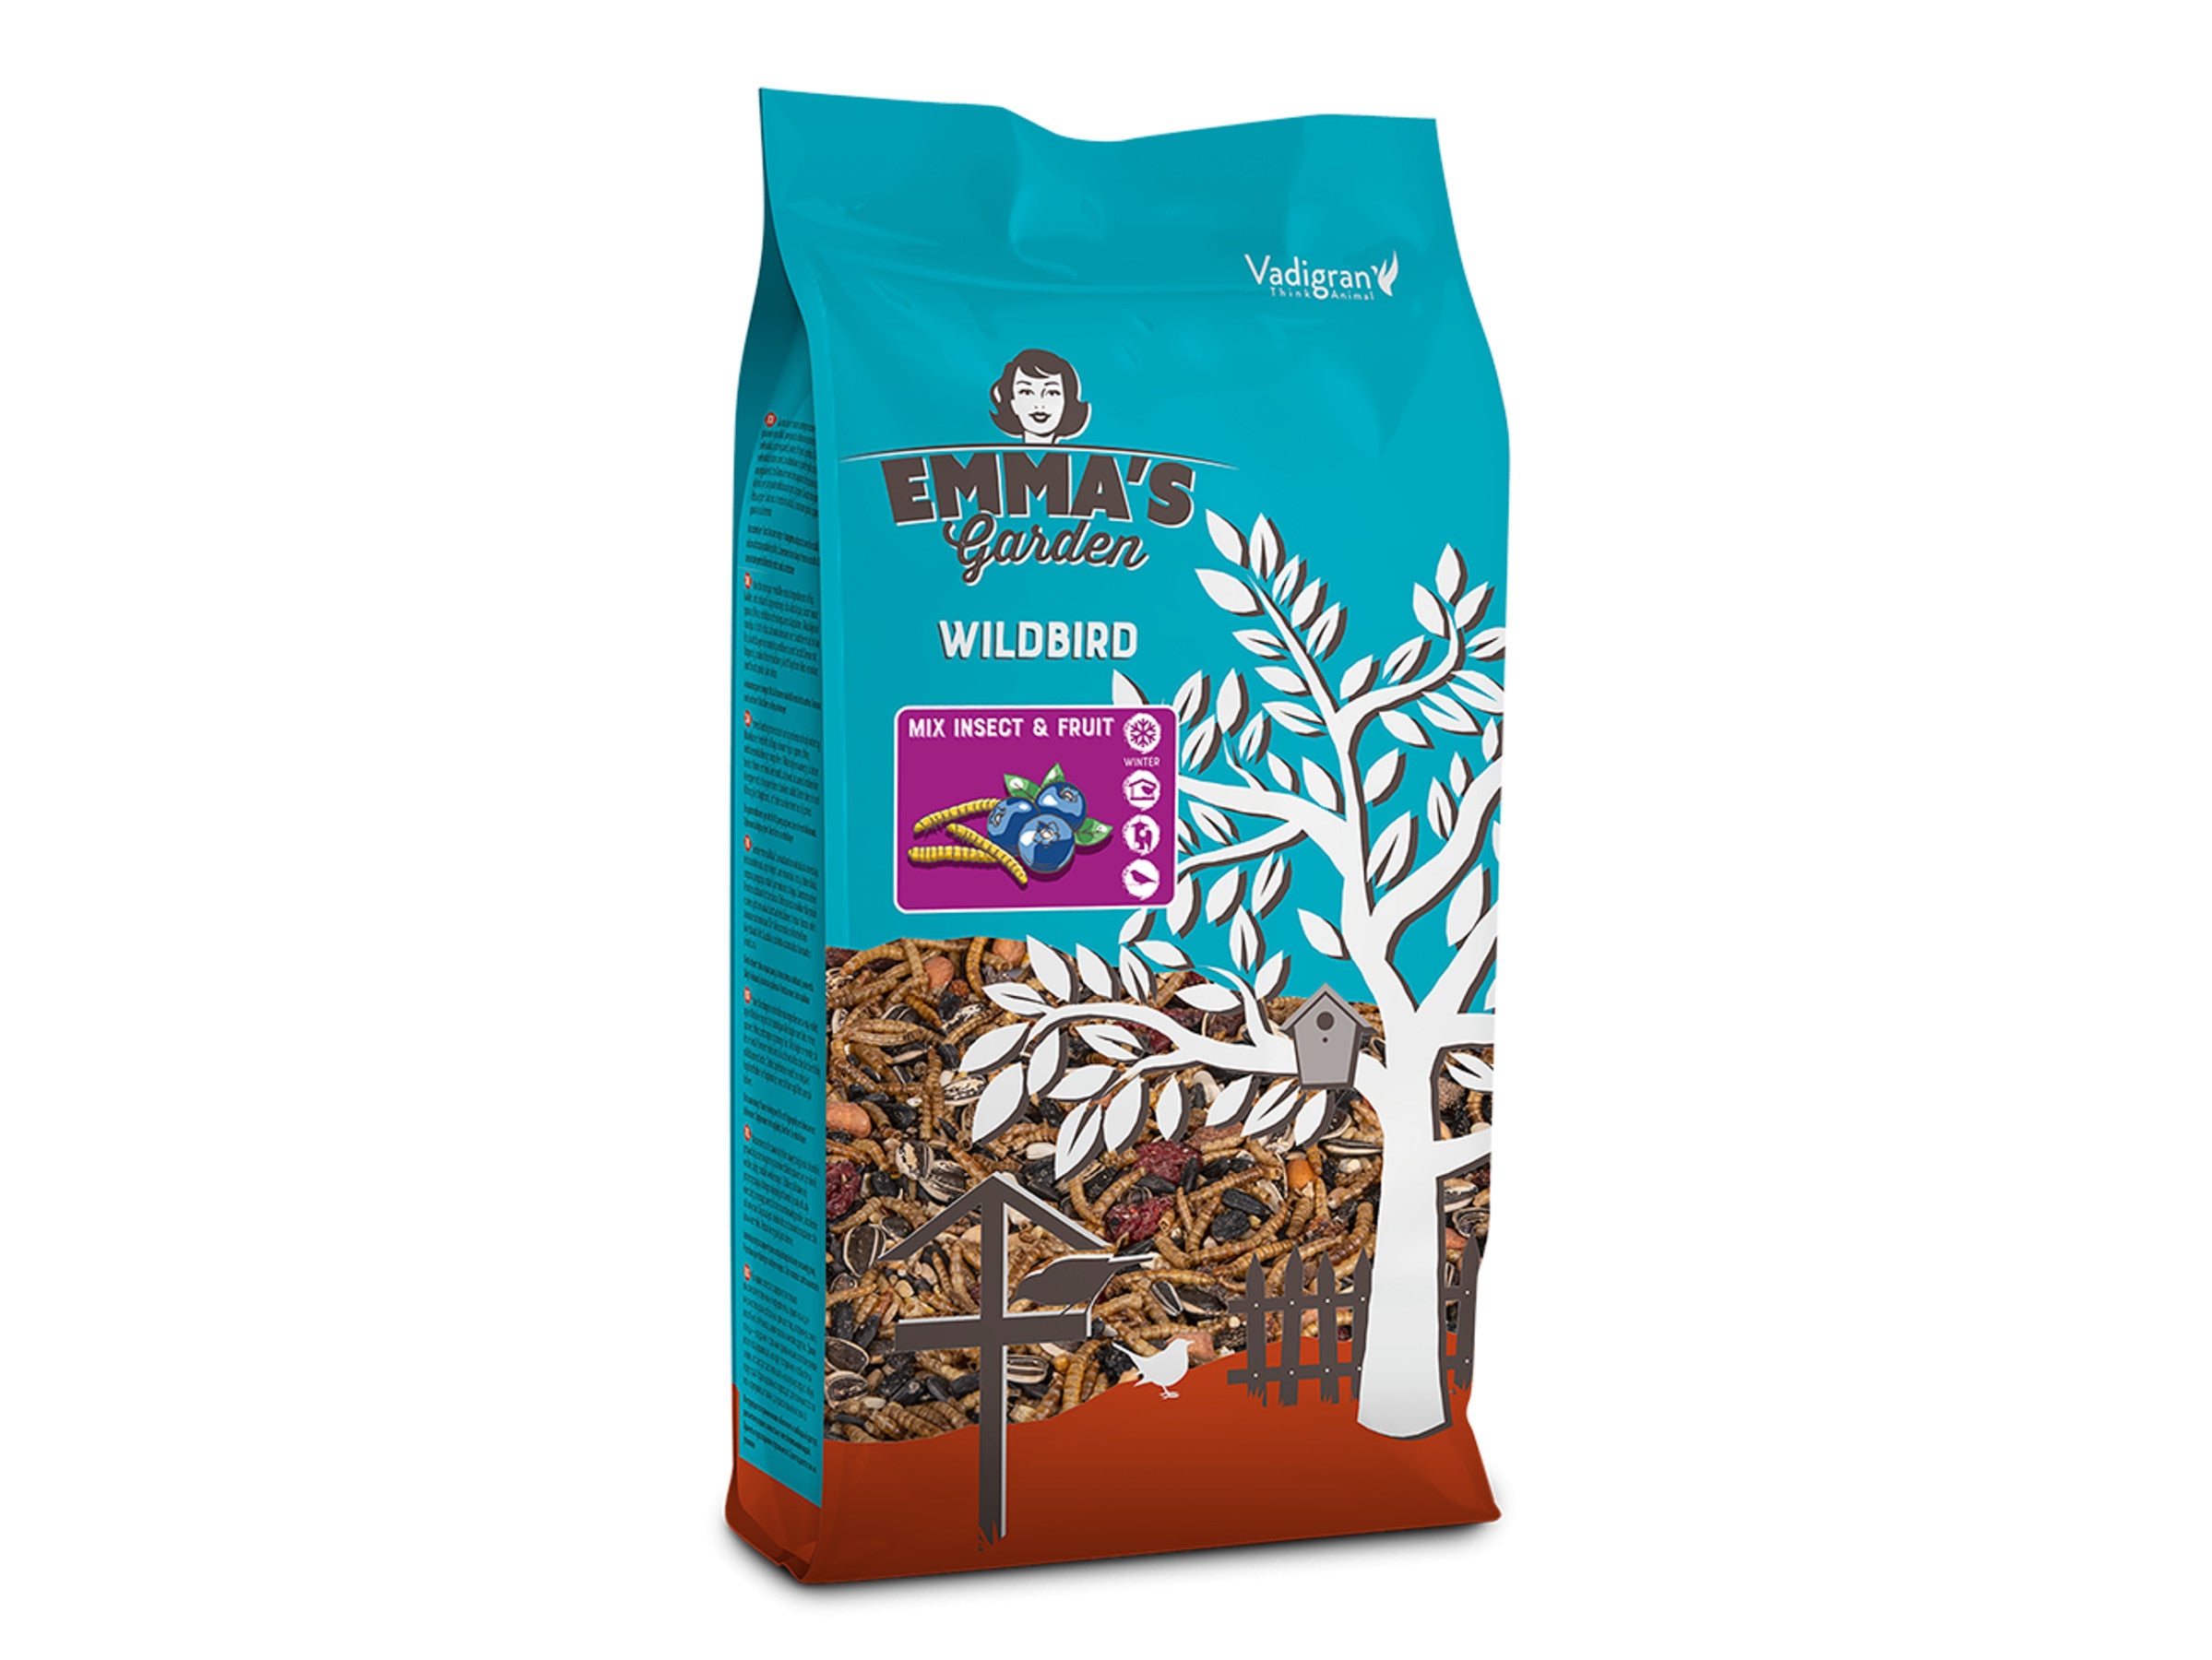 Emma Mix Insect & Fruit 2,25kg - Pip & Pepper by Dierenspeciaalzaak Huysmans